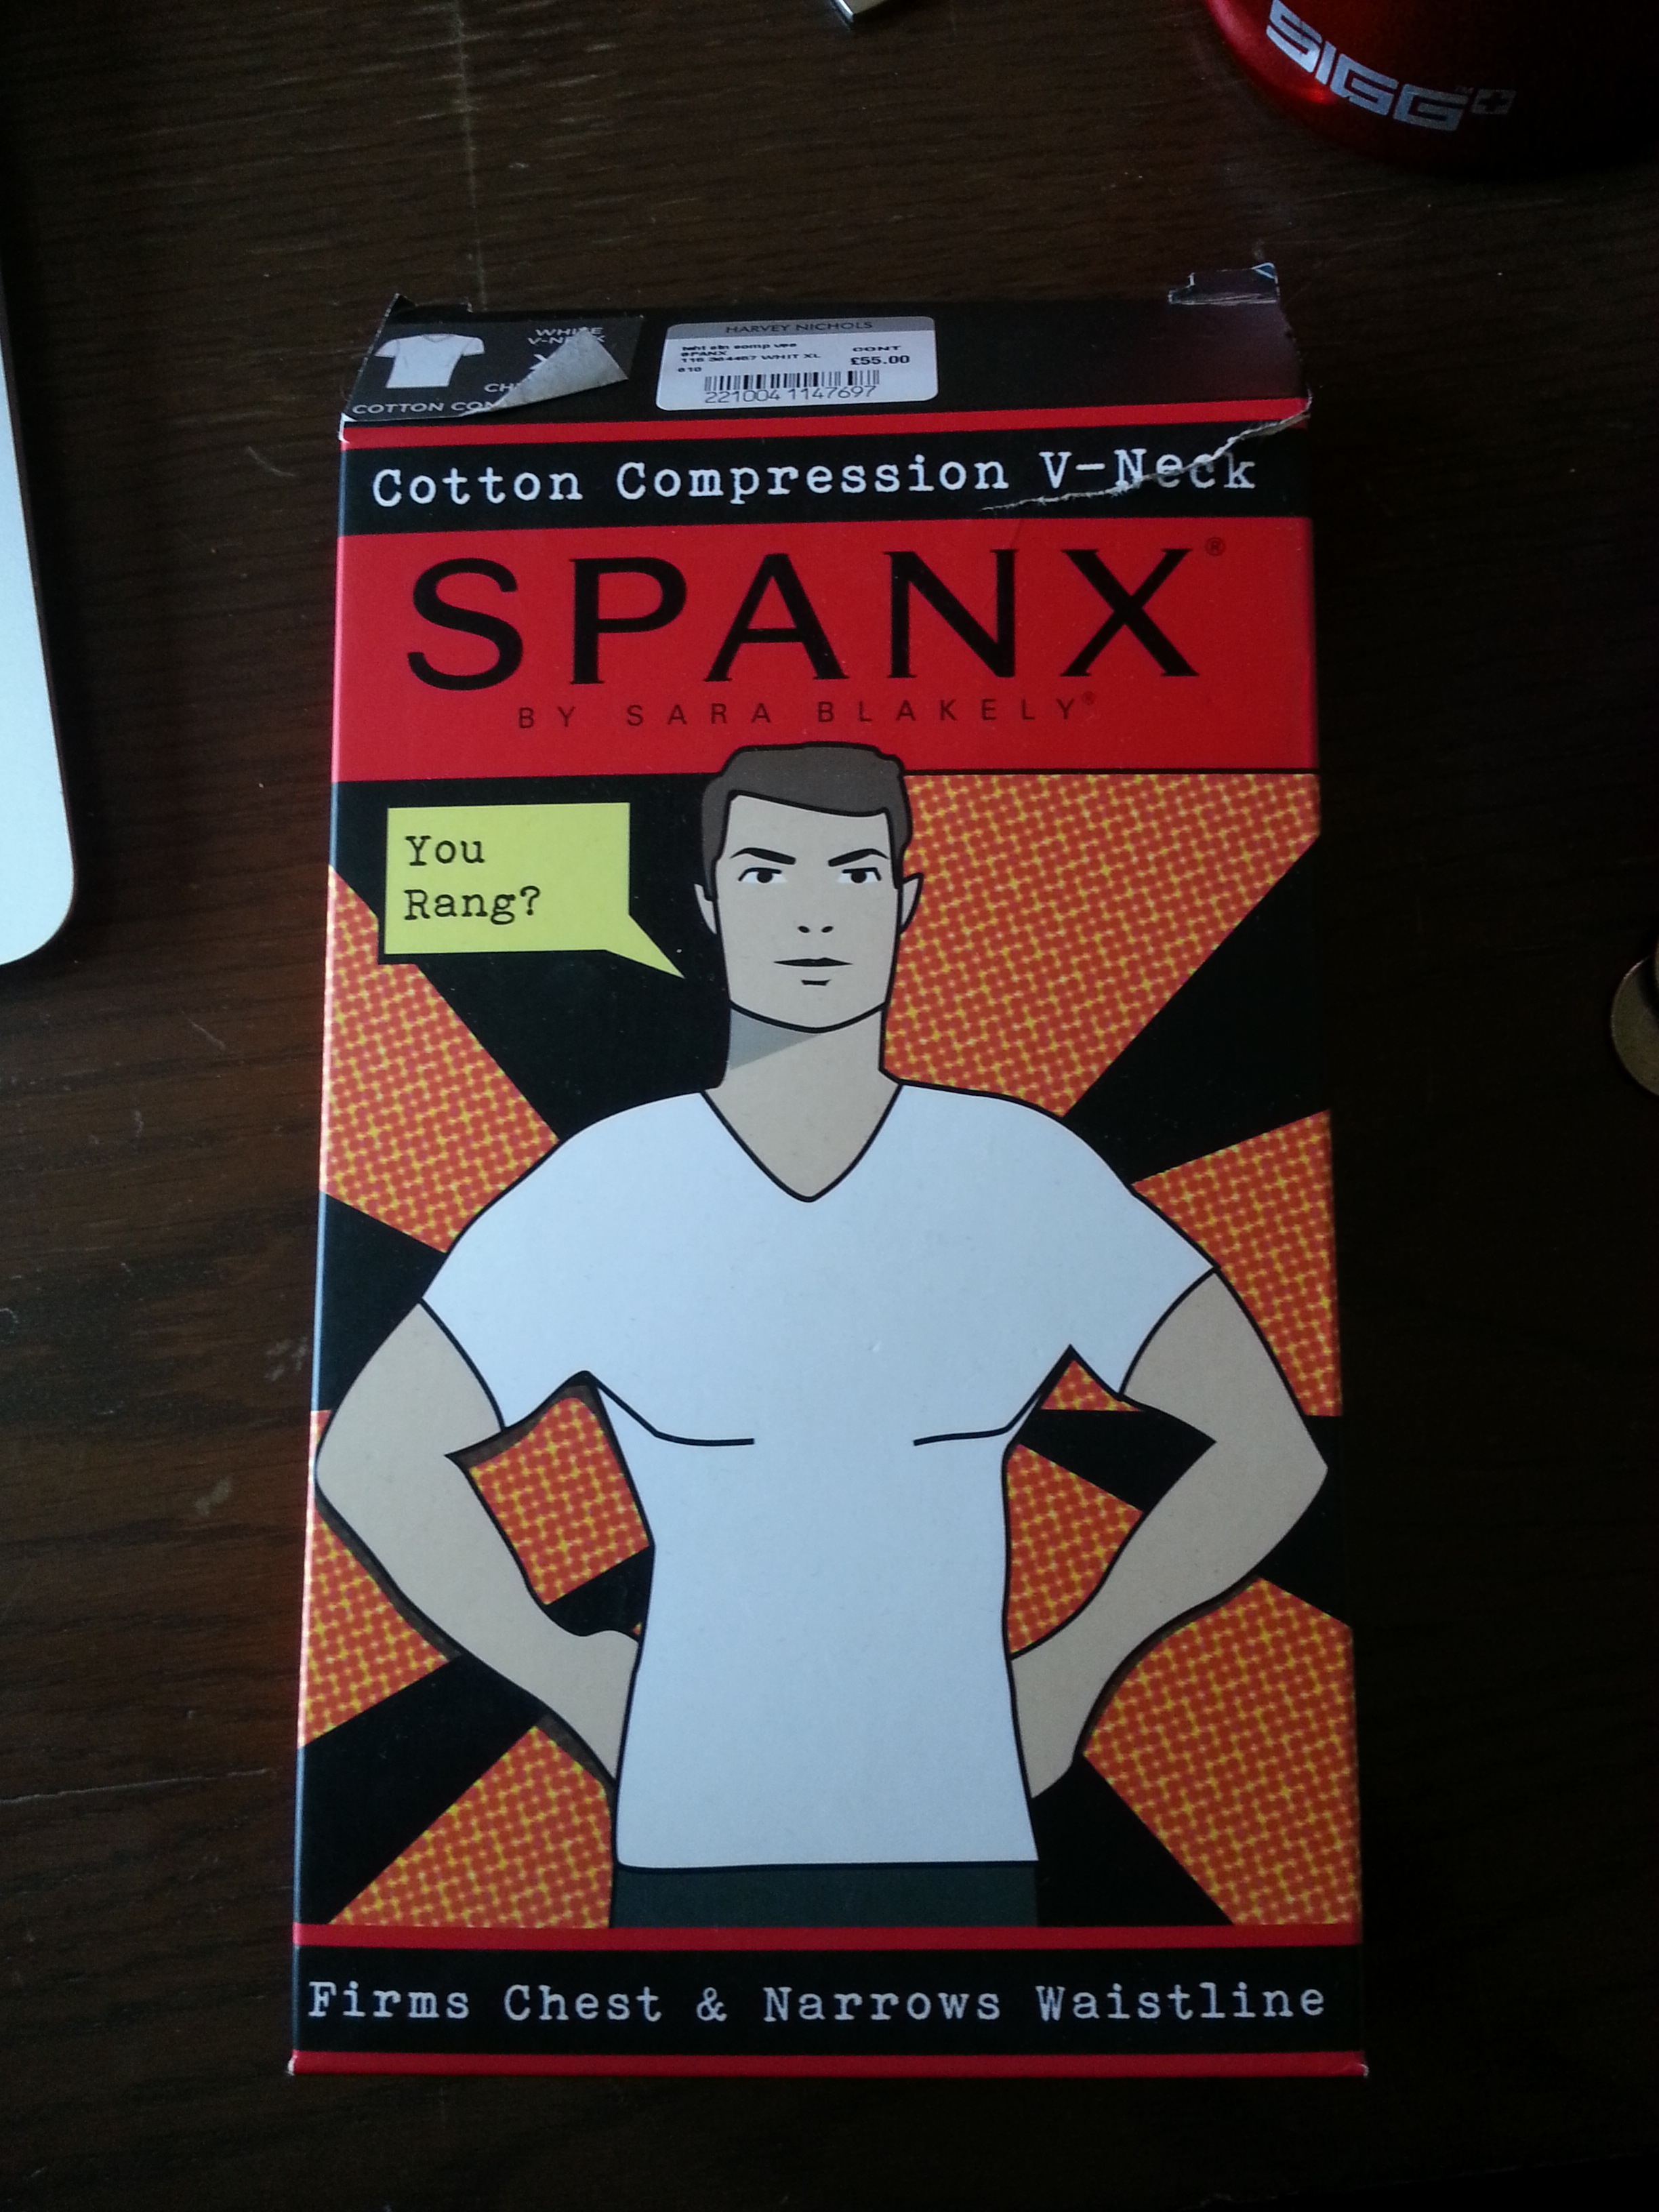 Spanx for Men – One User's Review